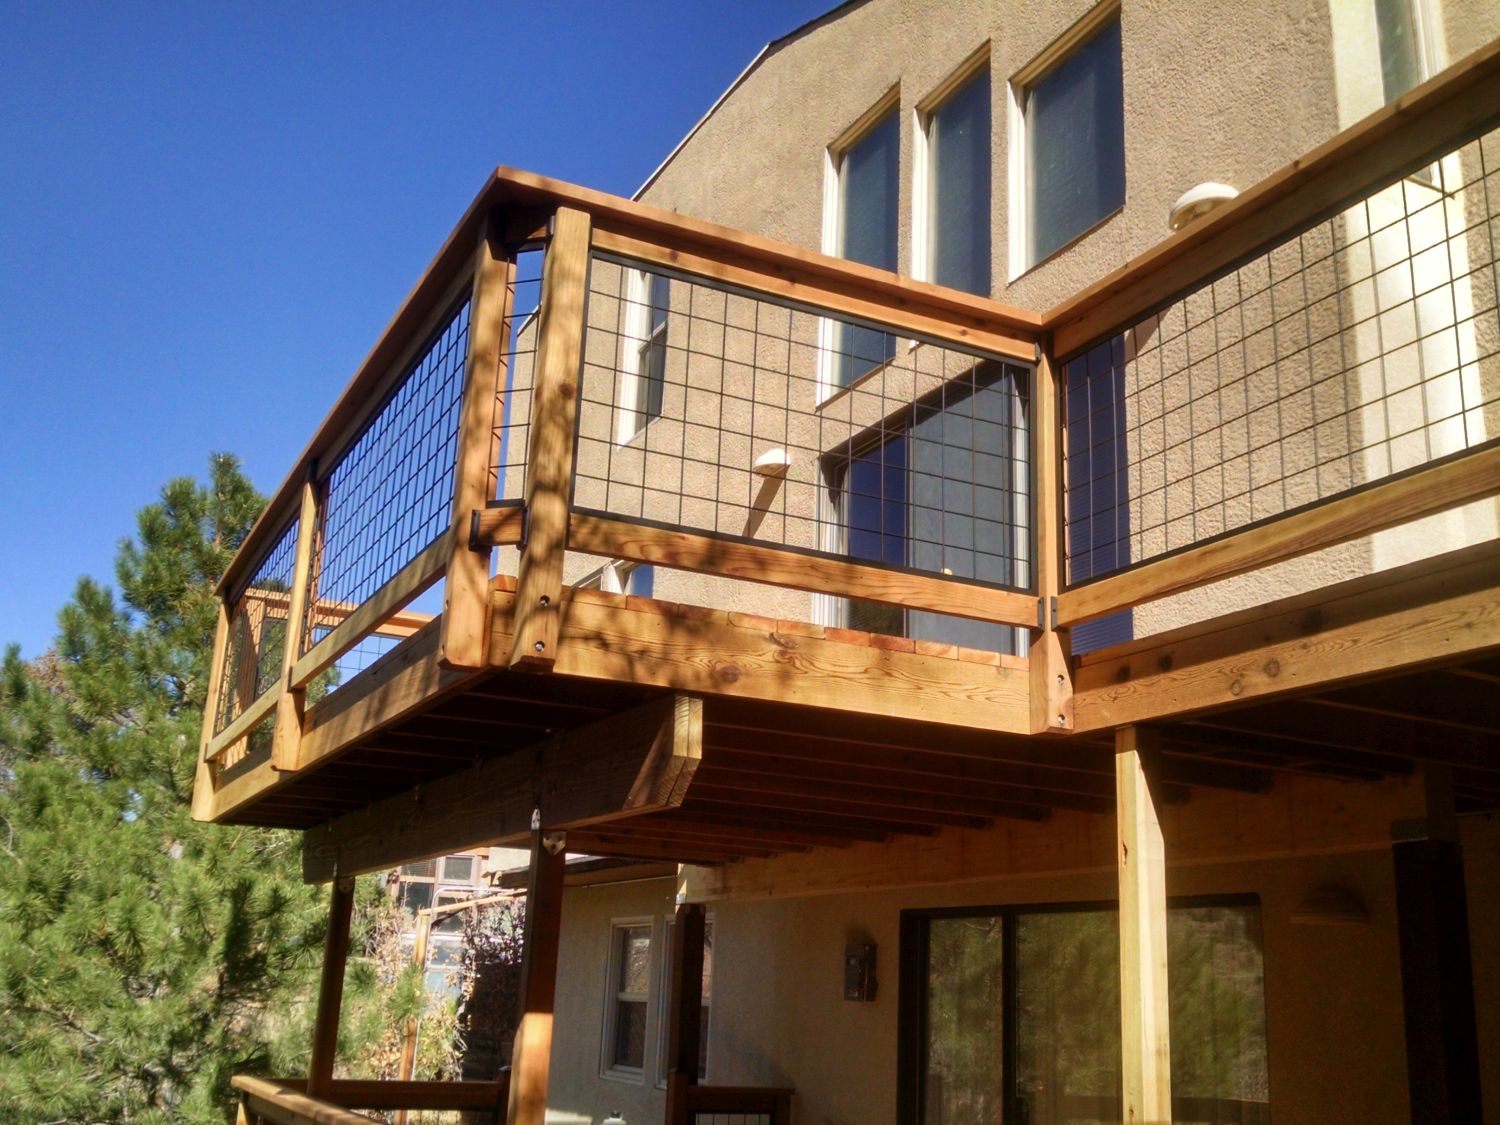 Elevated redwood deck that has a wood railing with Wild Hog metal grid panels installed.